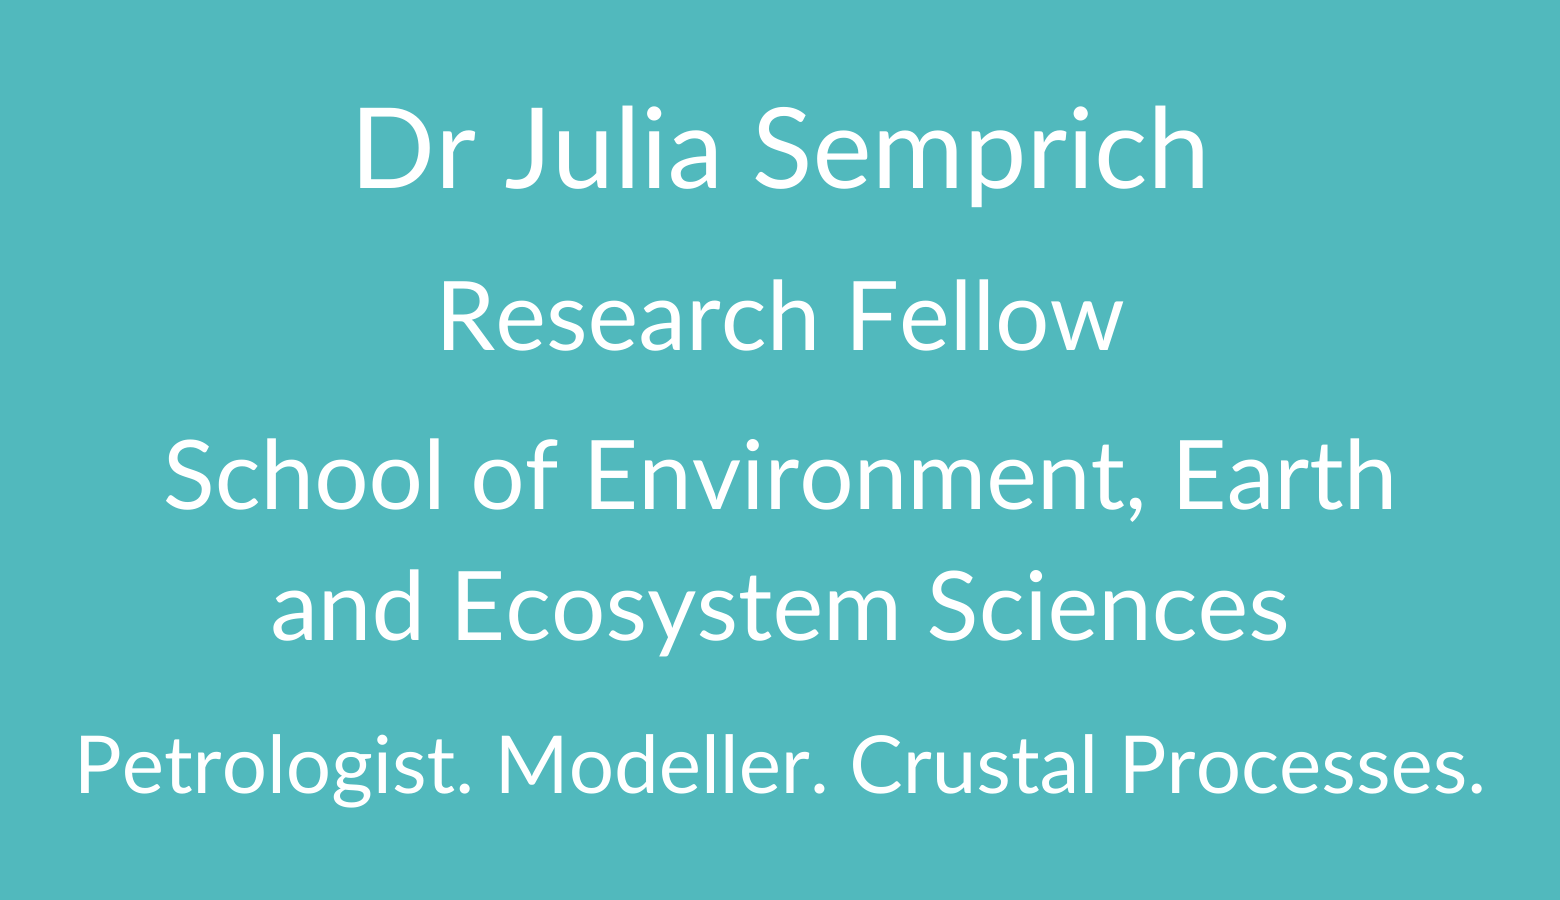 Dr Julia Semprich. Research Fellow. School of Environment, Earth and Ecosystem Sciences. Petrologist. Modeller. Crustal Processes.